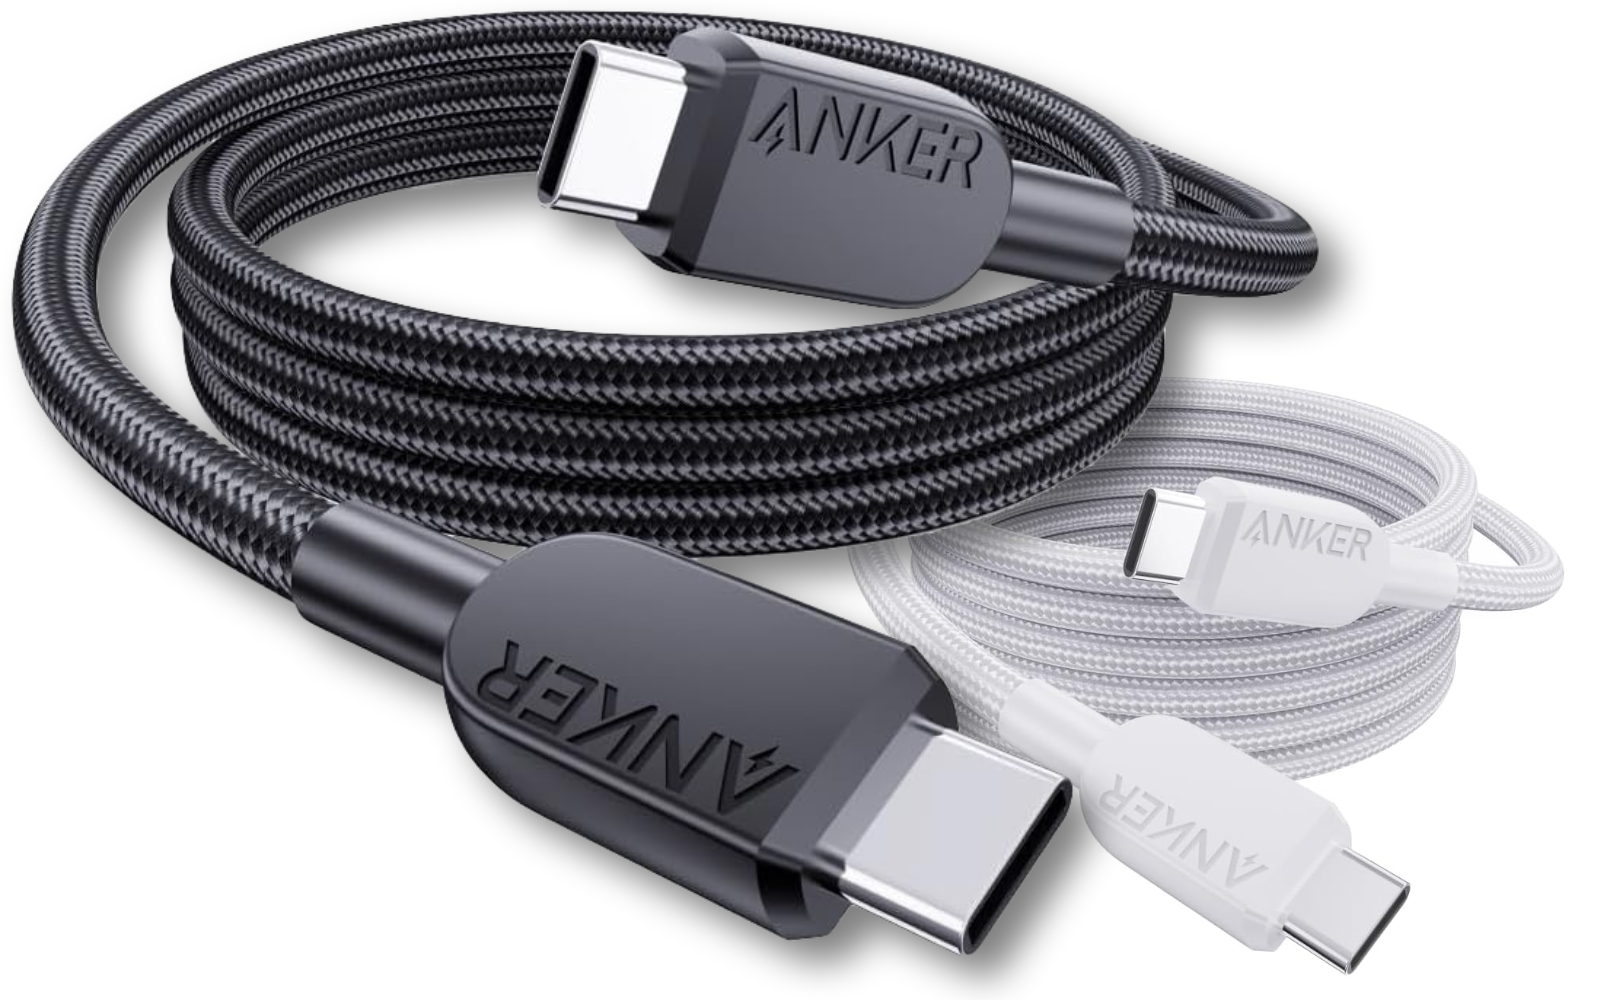 Anker Nylon Cable usb c cable